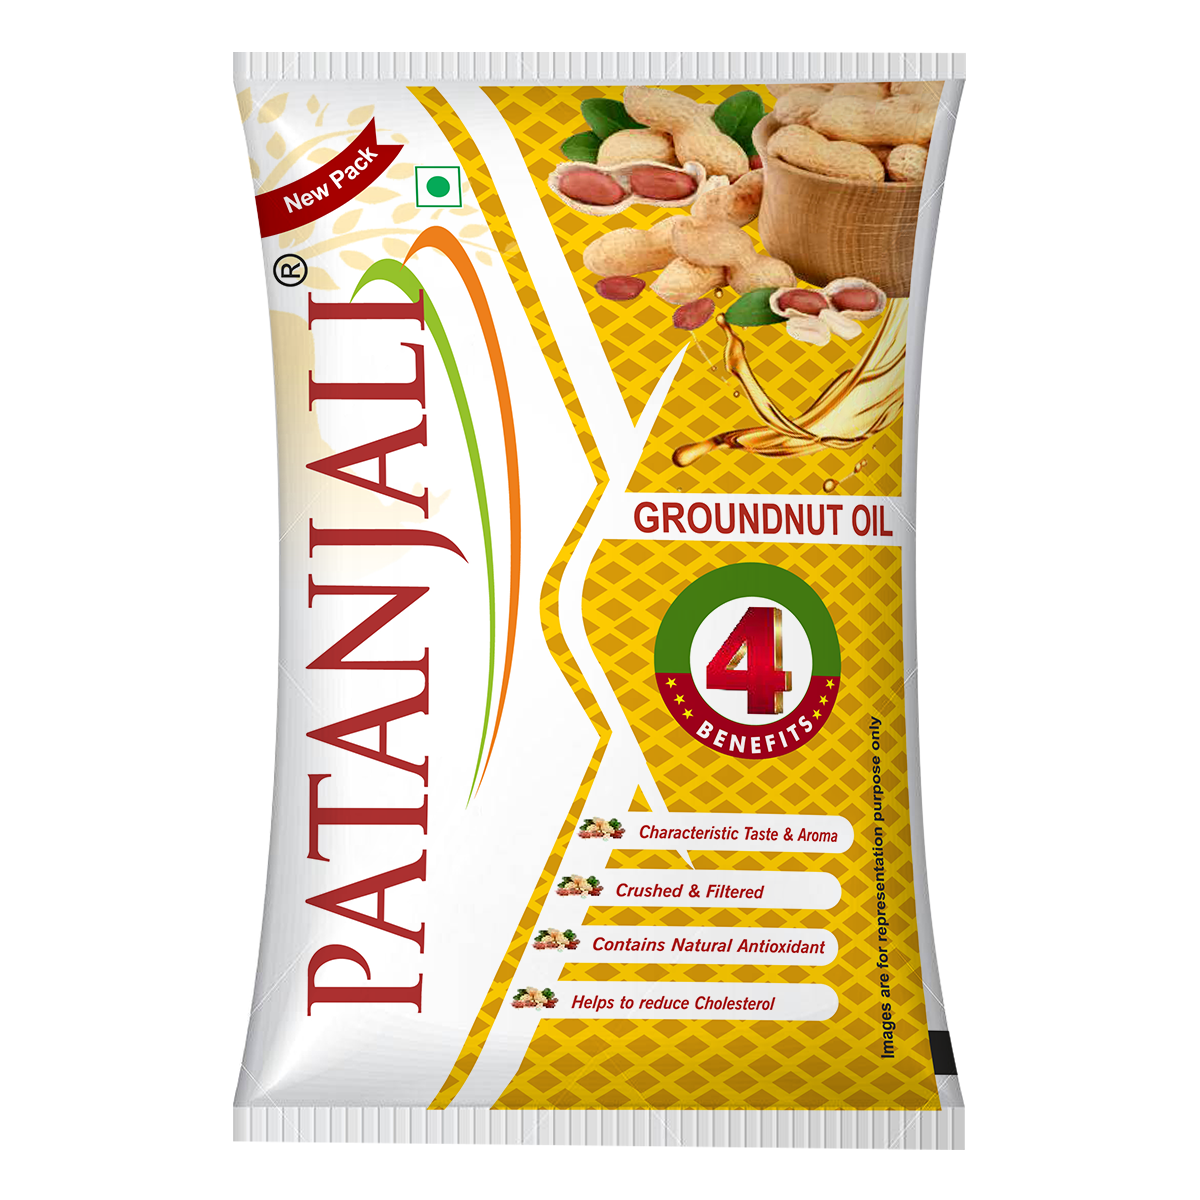 Patanjali Groundnut Oil Pouch